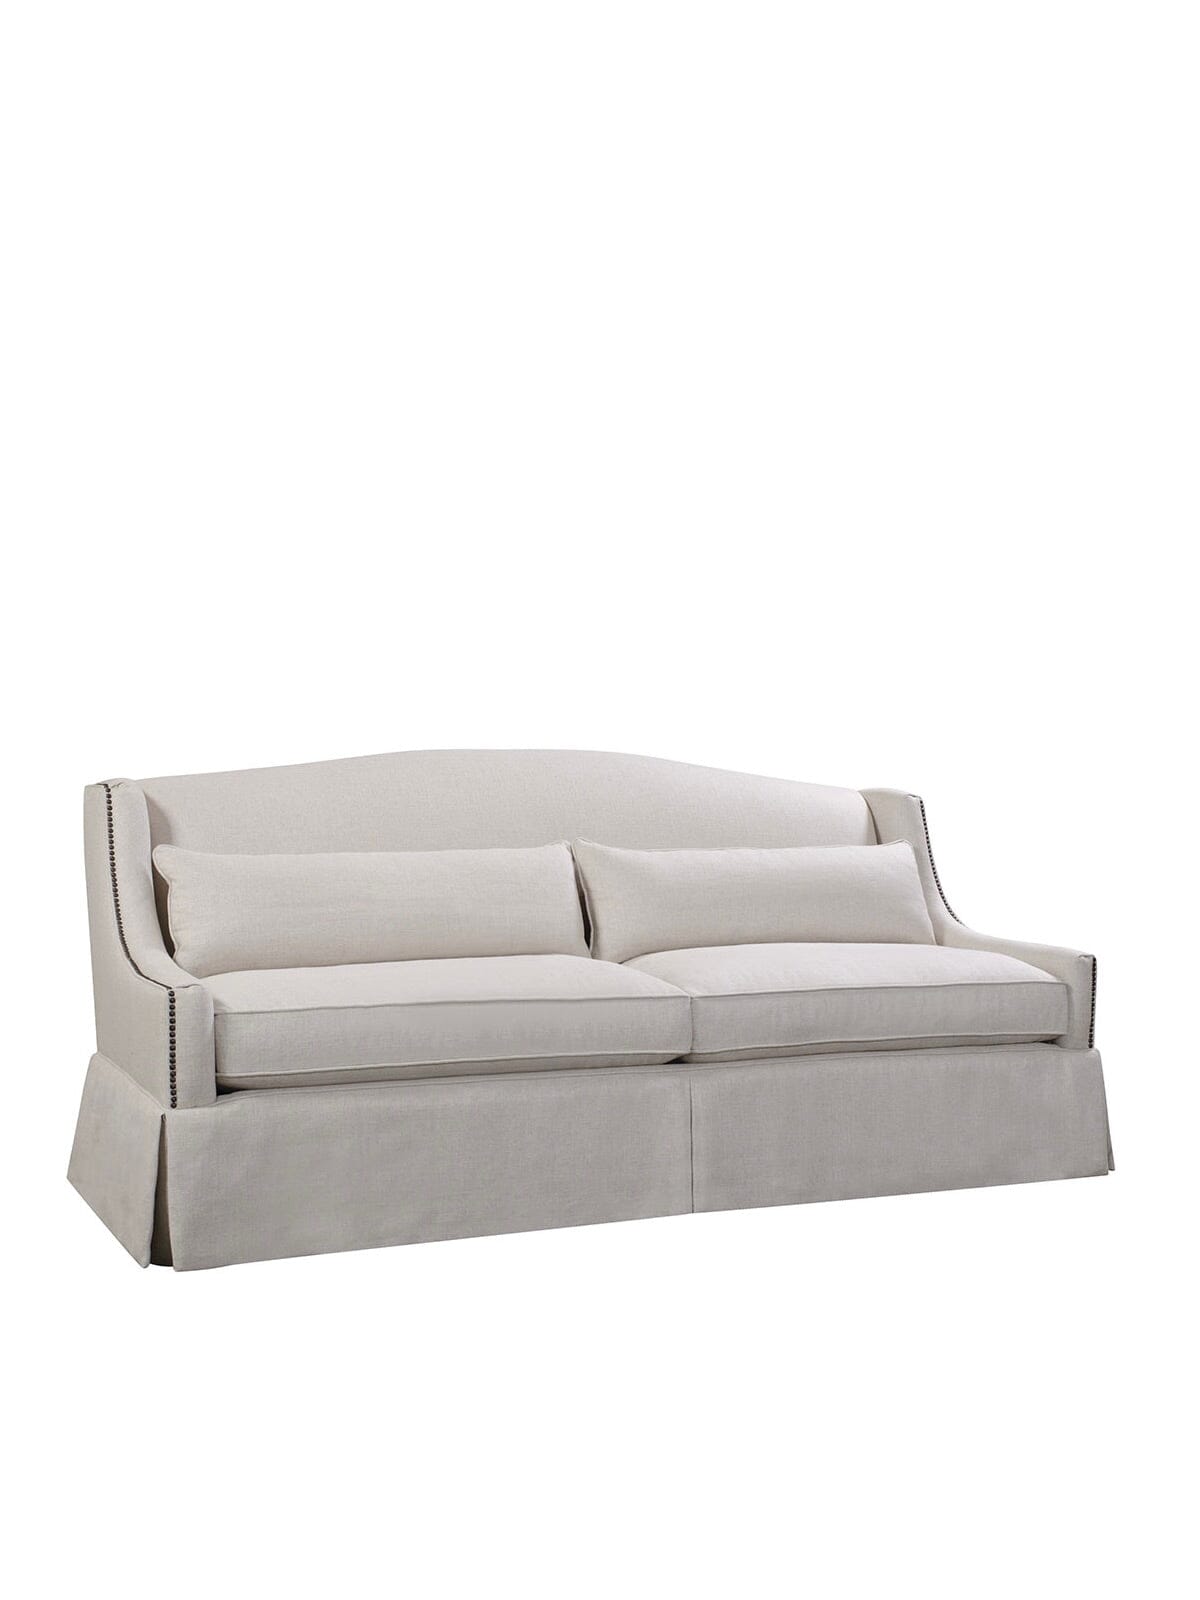 Belmont 89" Sofa by Huck & Peck SOFA Huck and Peck